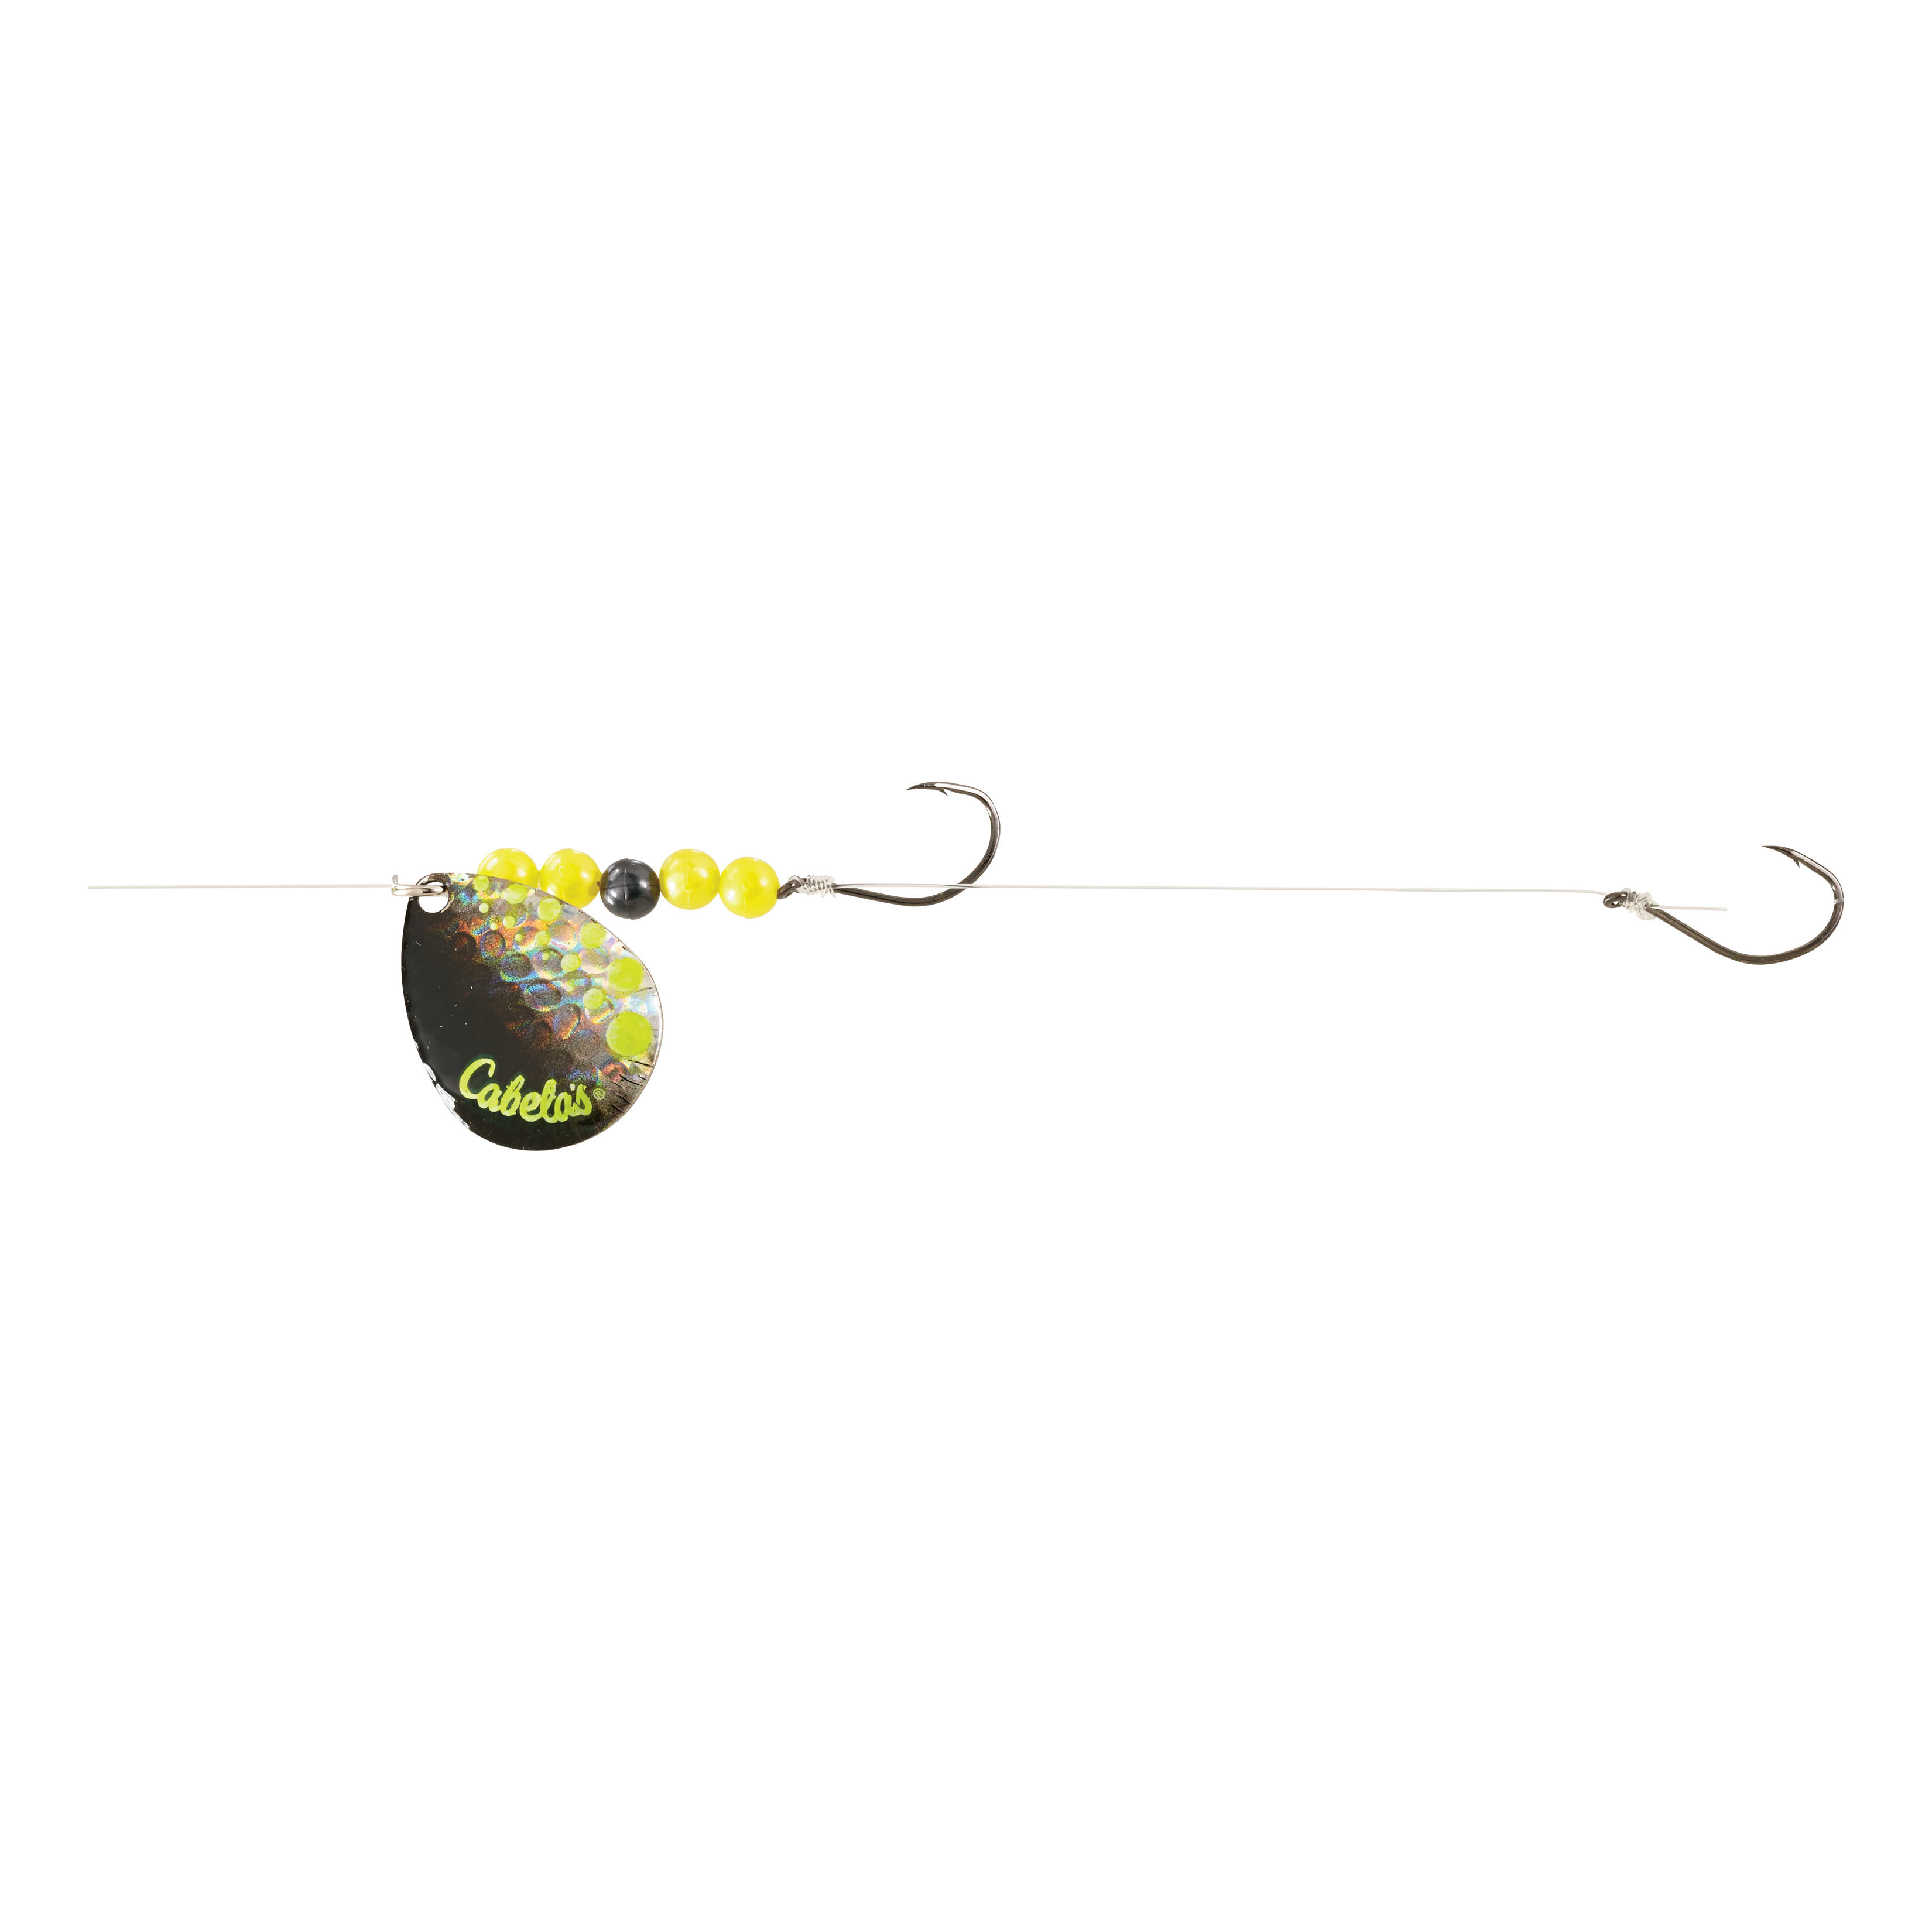 Cabela’s Charter Series Walleye Rig - Chartreuse